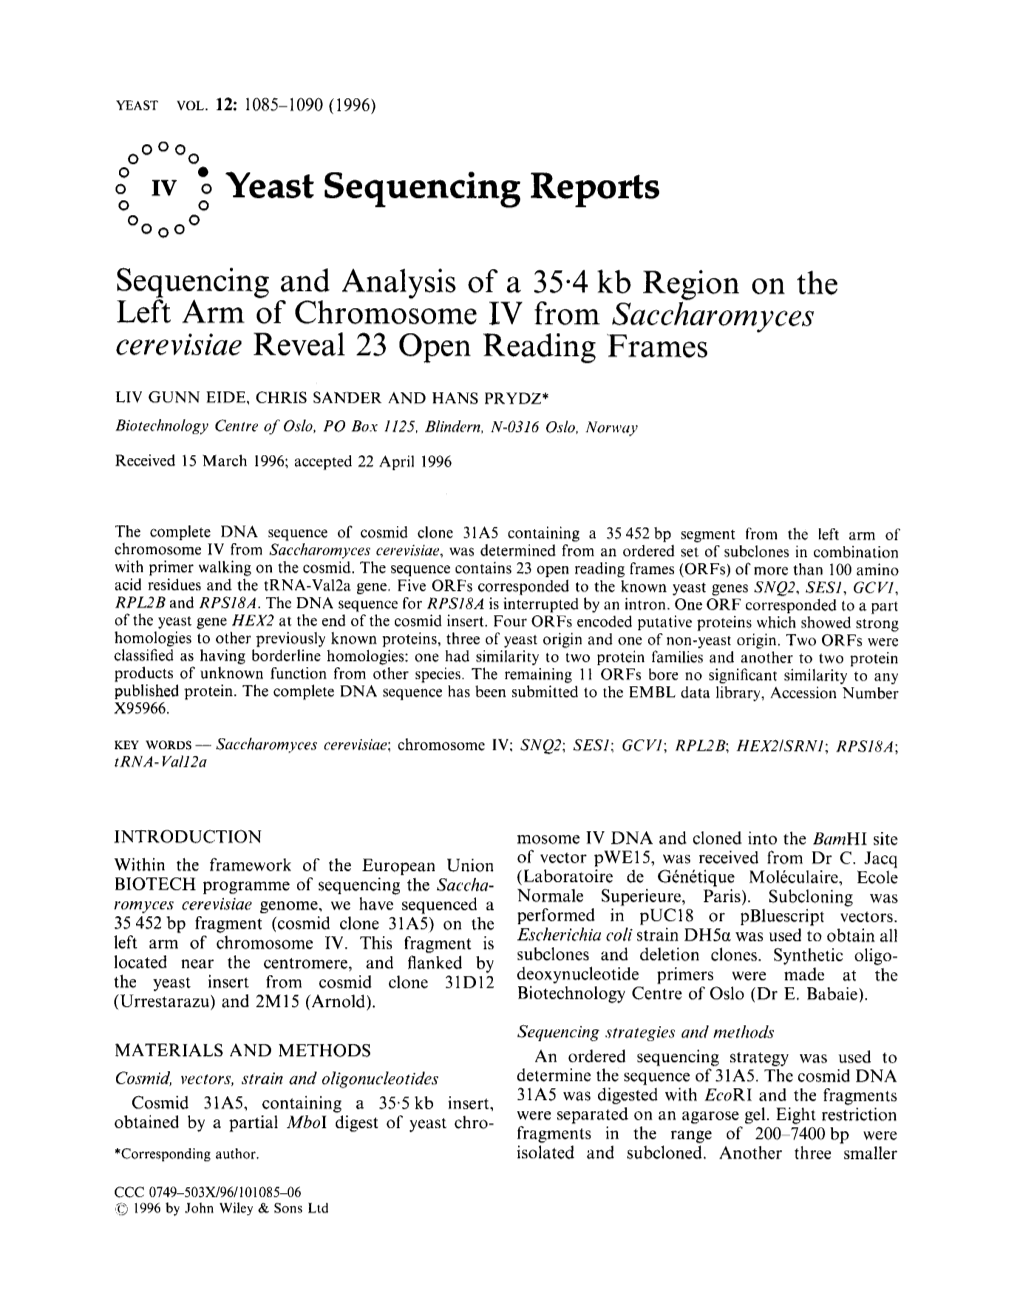 Sequencing and Analysis of a 35·4 Kb Region on the Left Arm Of